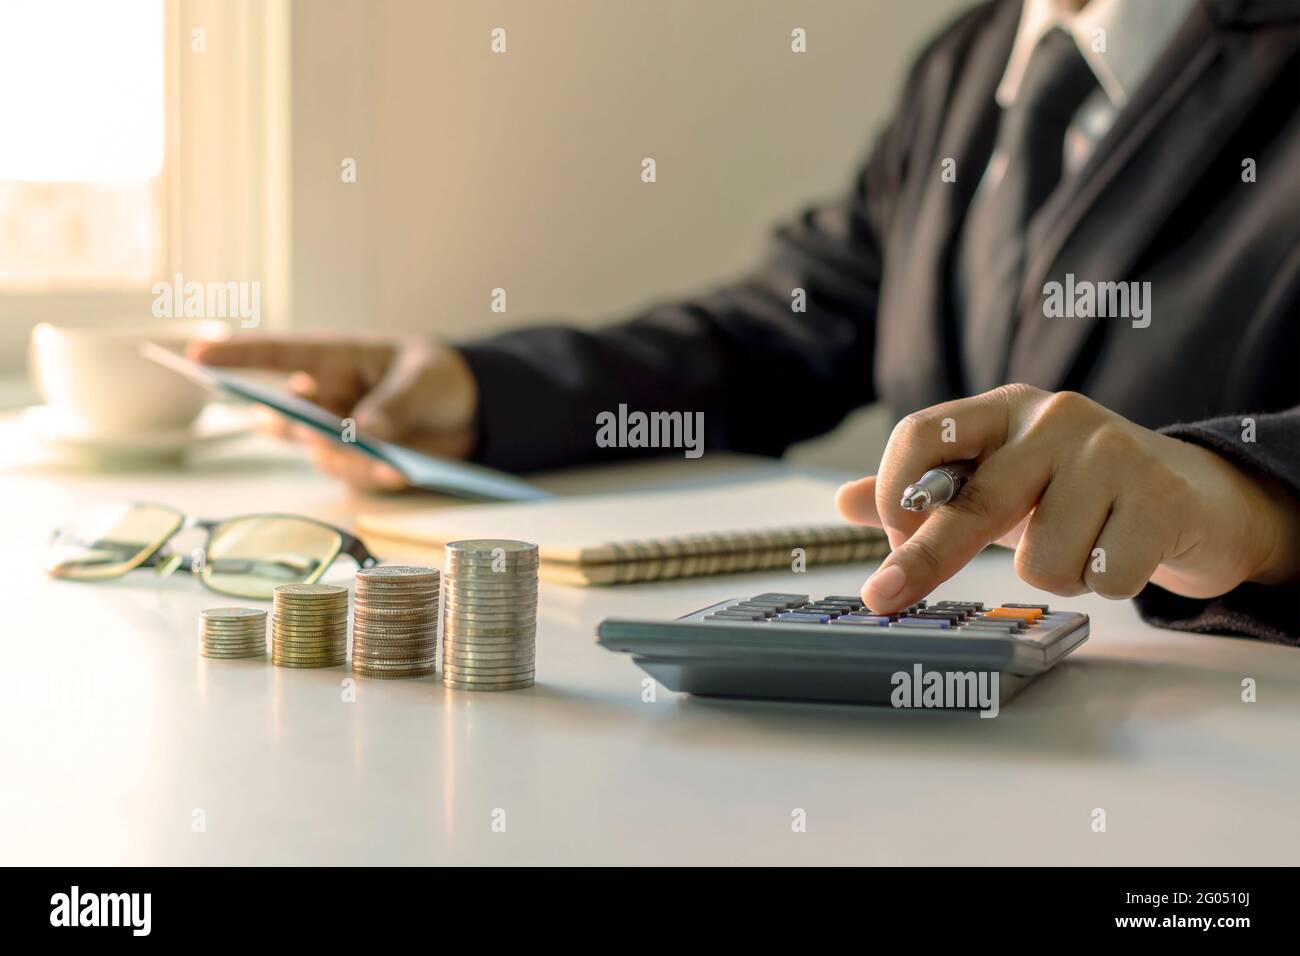 The businessman is holding a pen and pressing to a calculator, ideas for planning for investment and money growth. Stock Photo